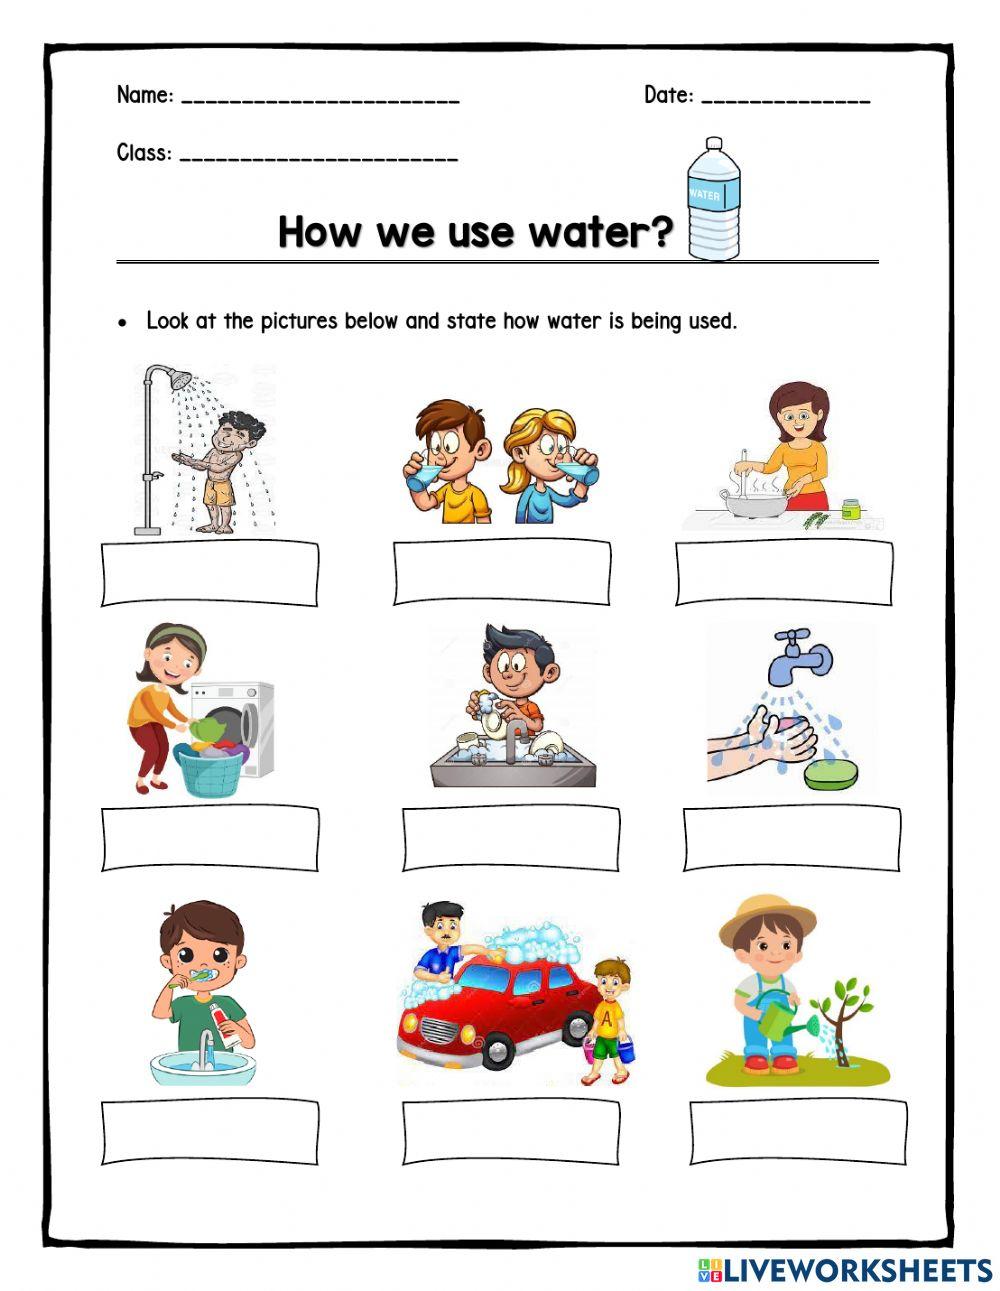 Uses of Water